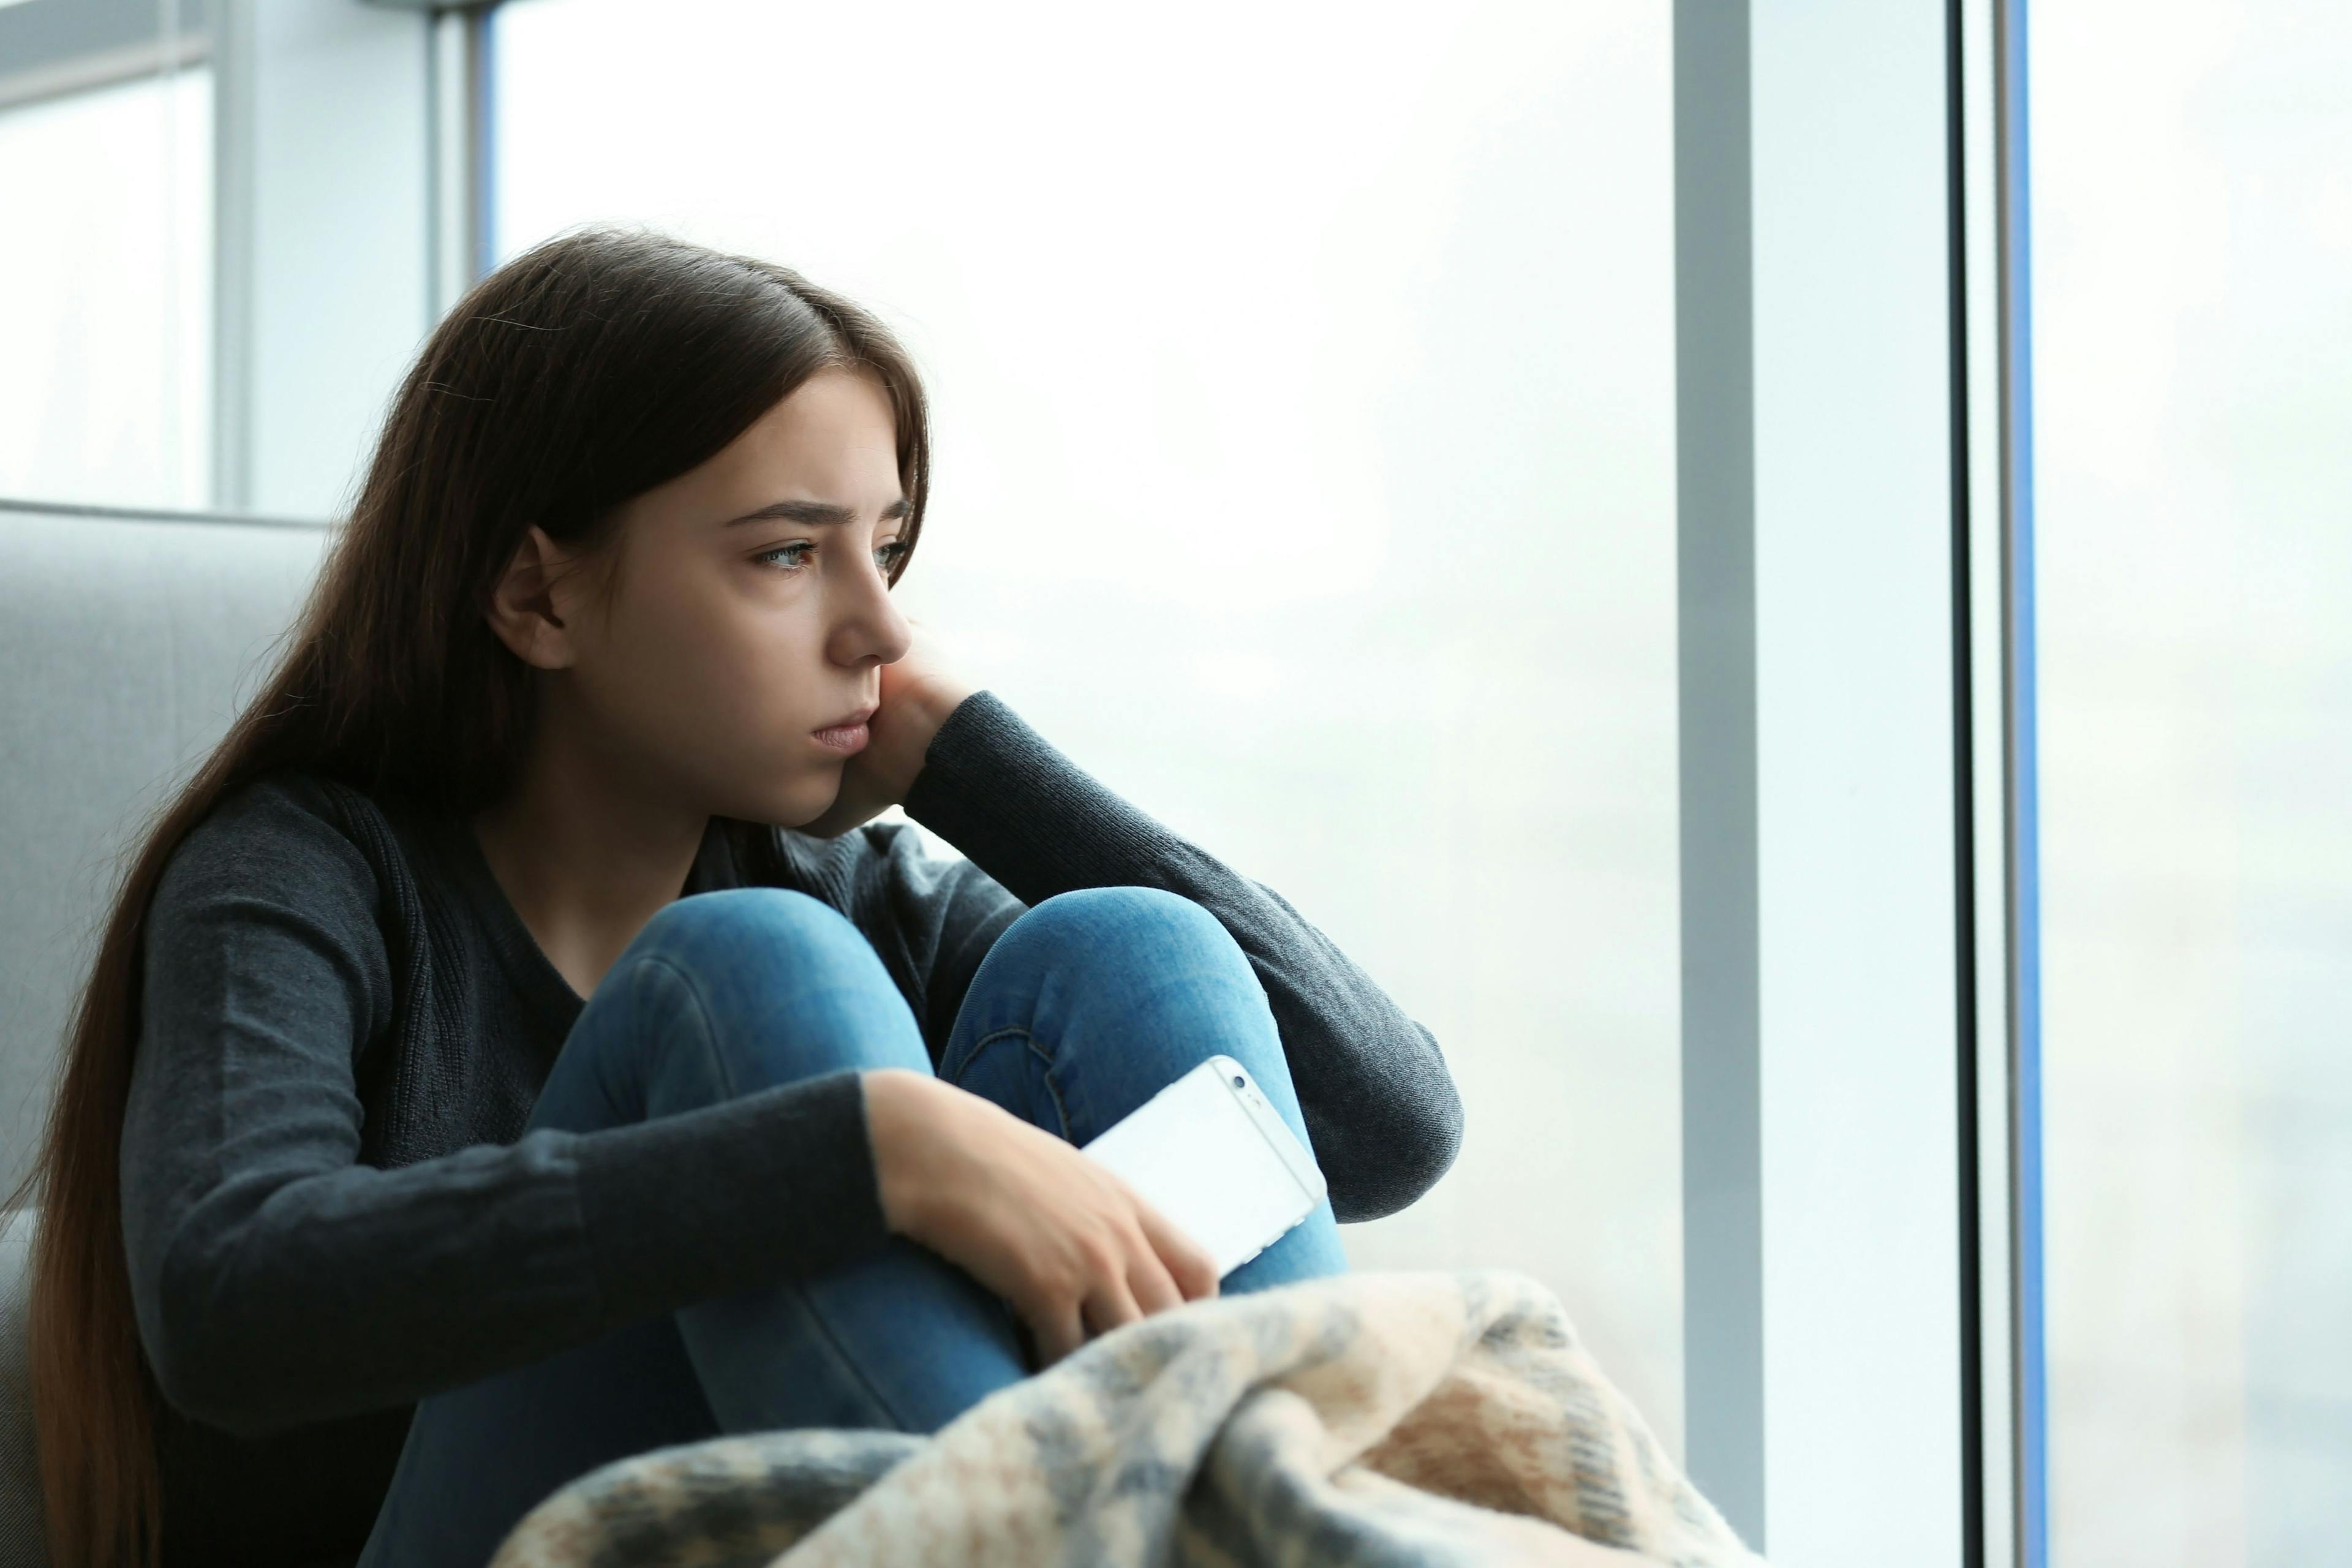 New recommendations call for depression screenings for those aged 12-18 years